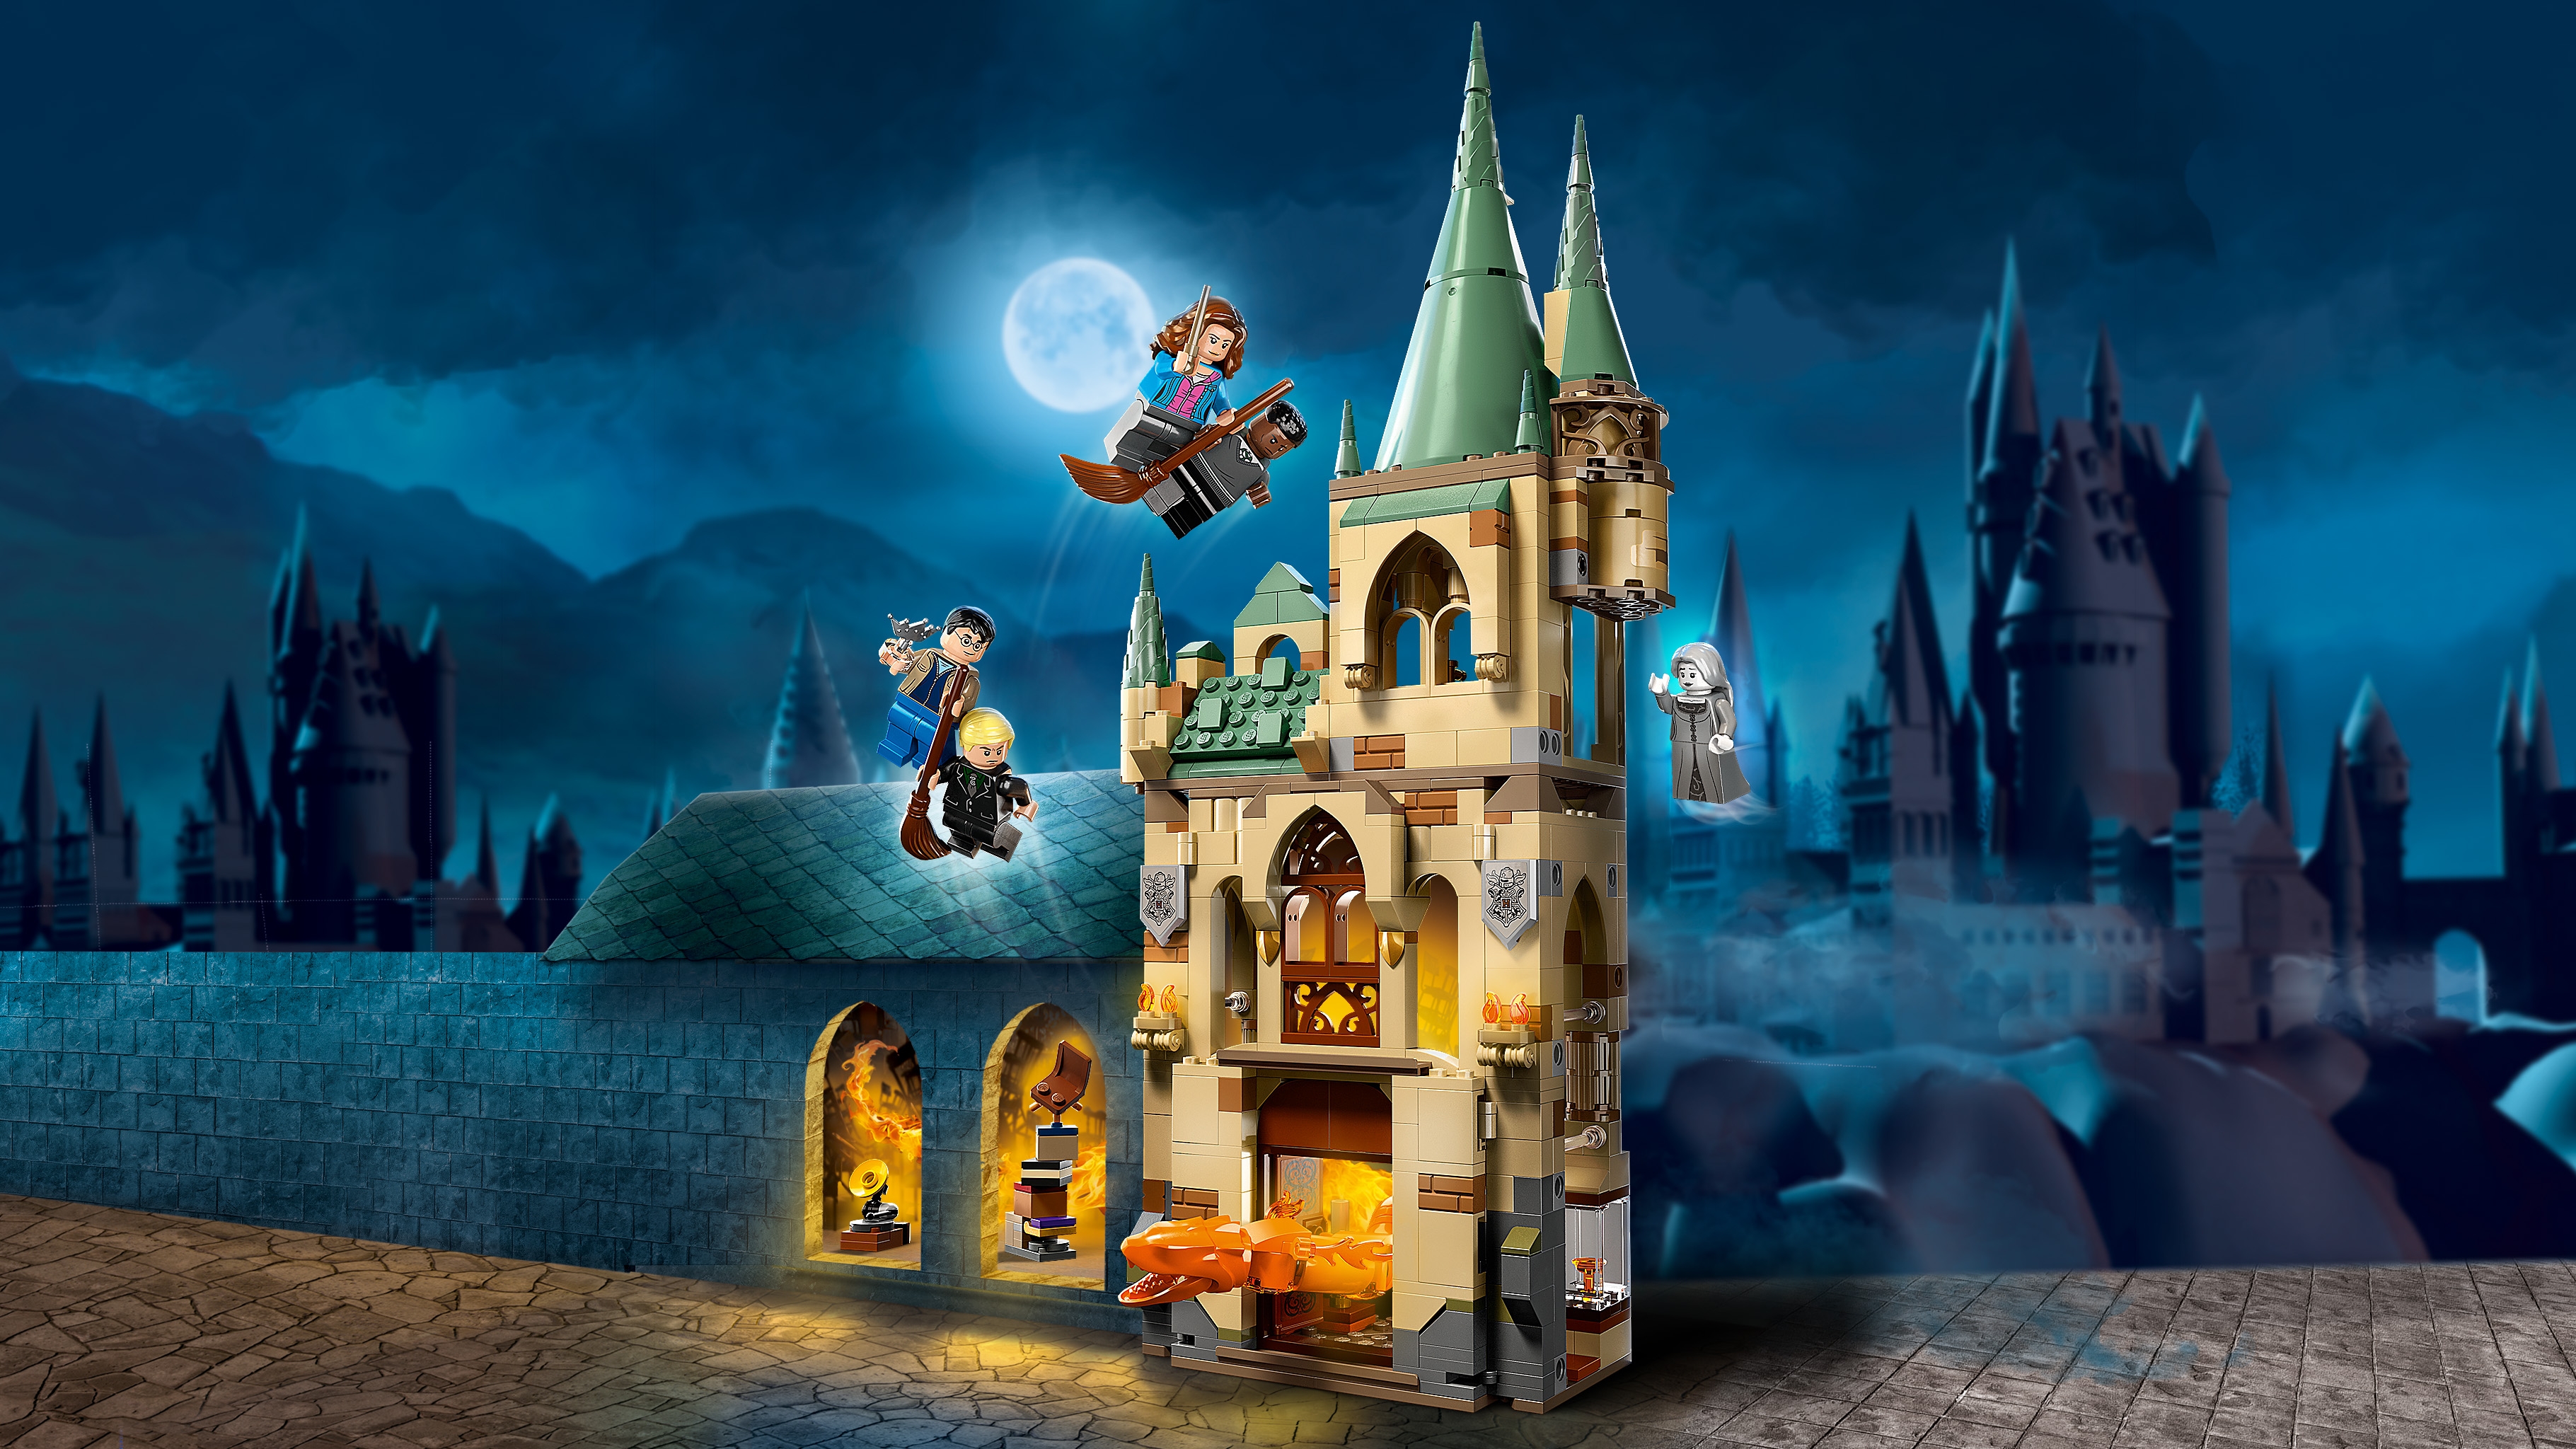 Lego is offering a free Harry Potter Hogwarts set – claim yours